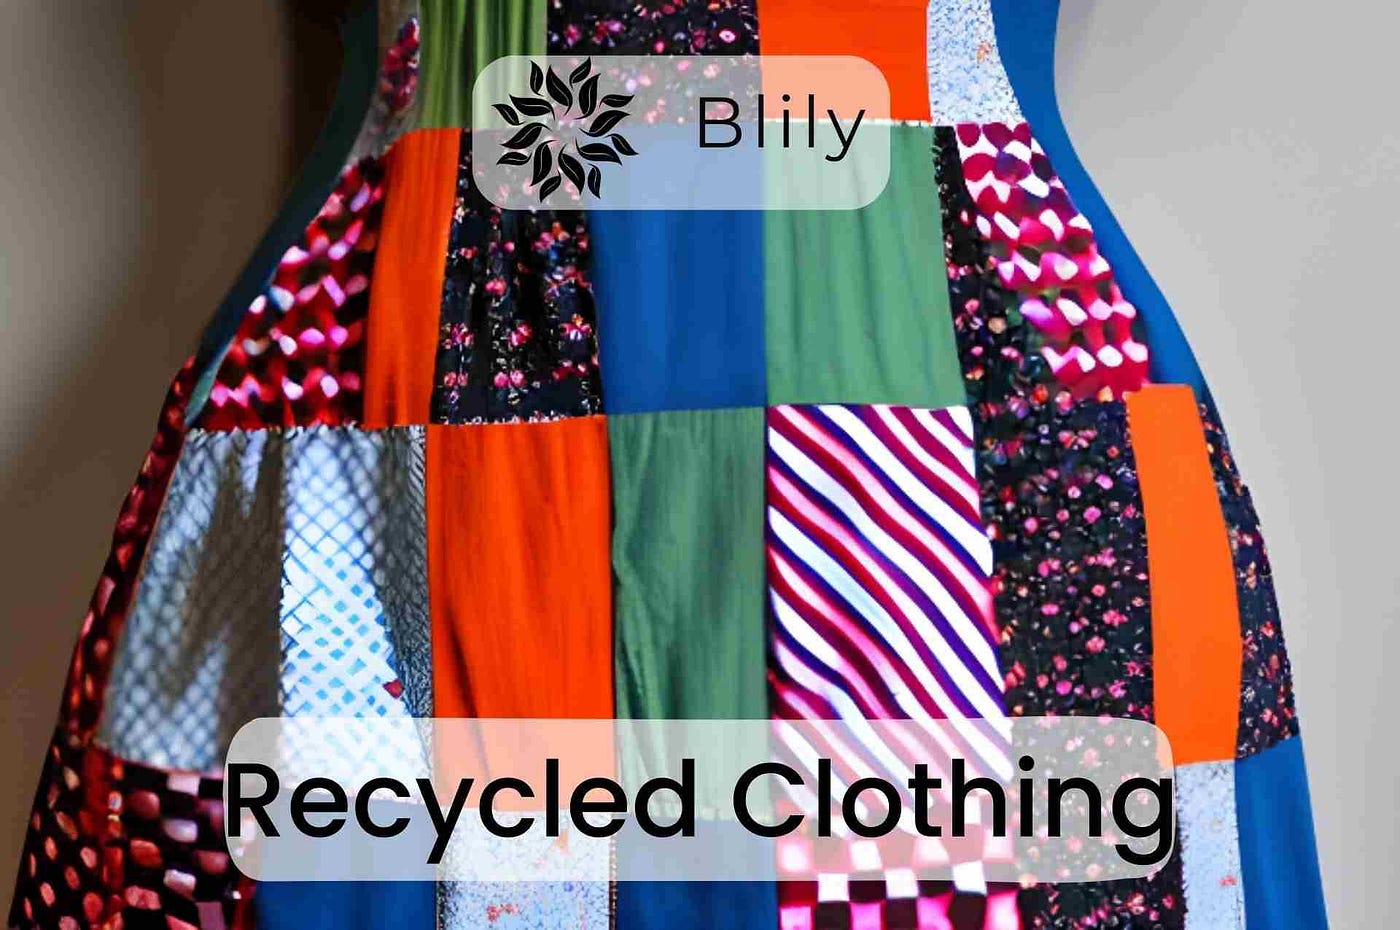 From Trash to Trend: How Recycled Clothing is Redefining Fashion